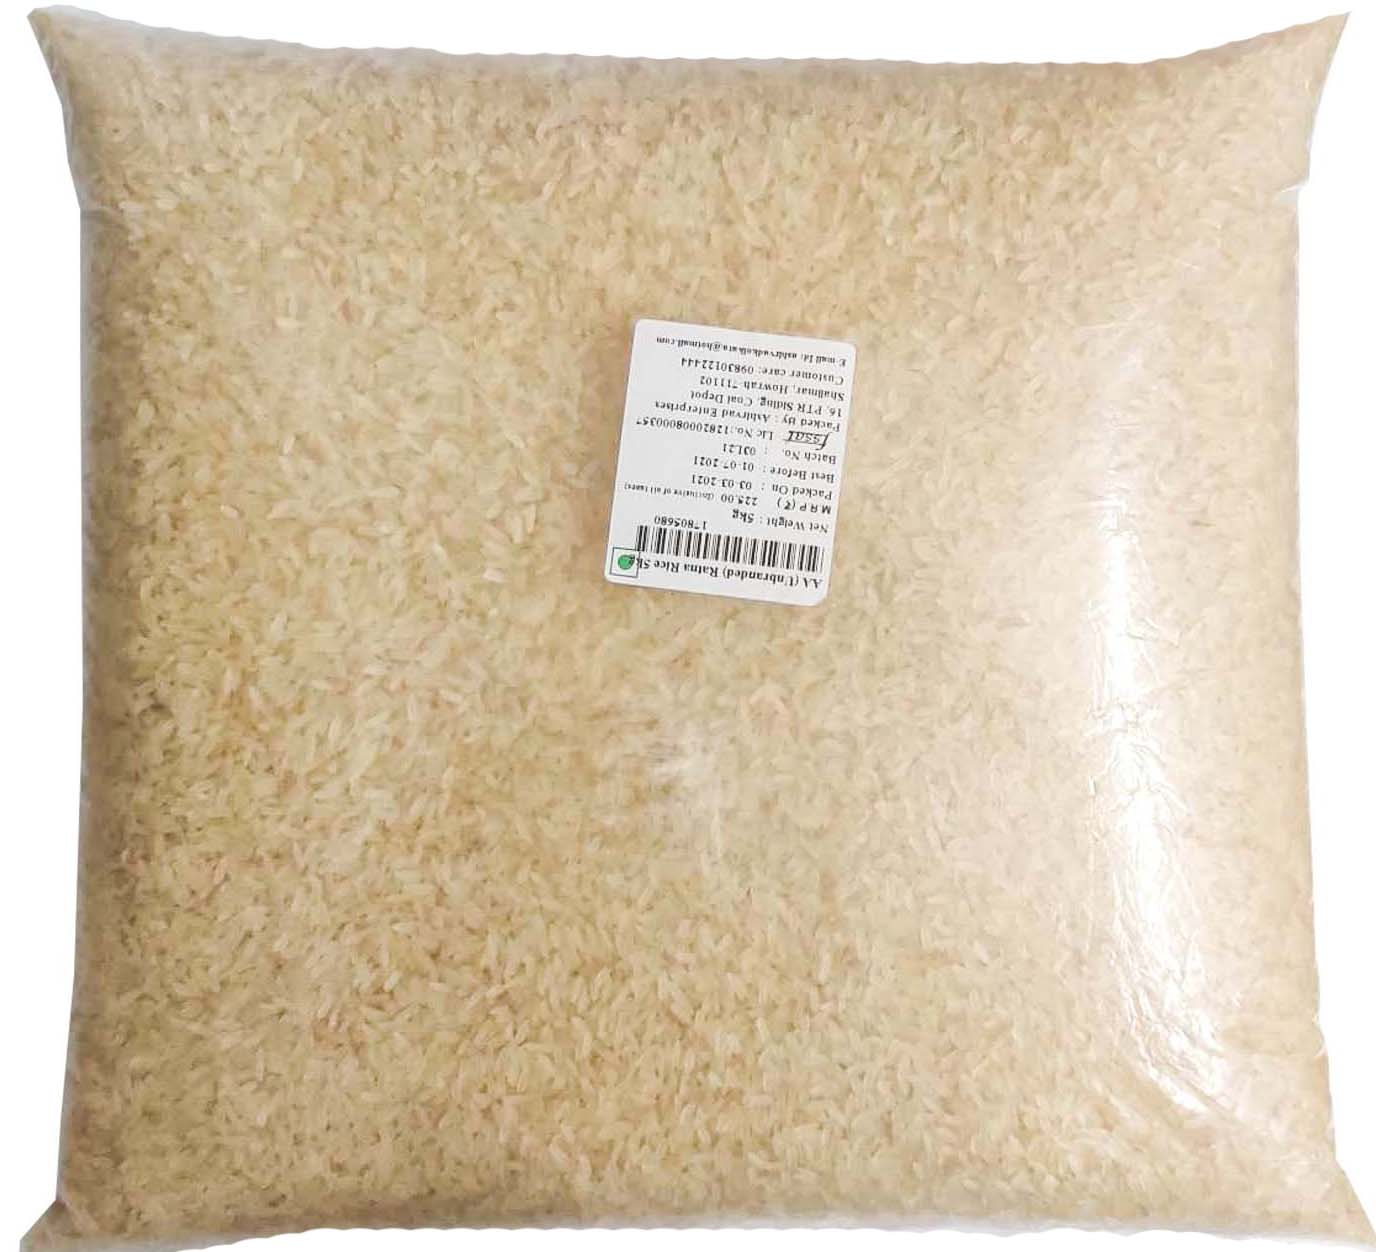 AA (UNBRANDED) RATNA RICE (5.00KG)